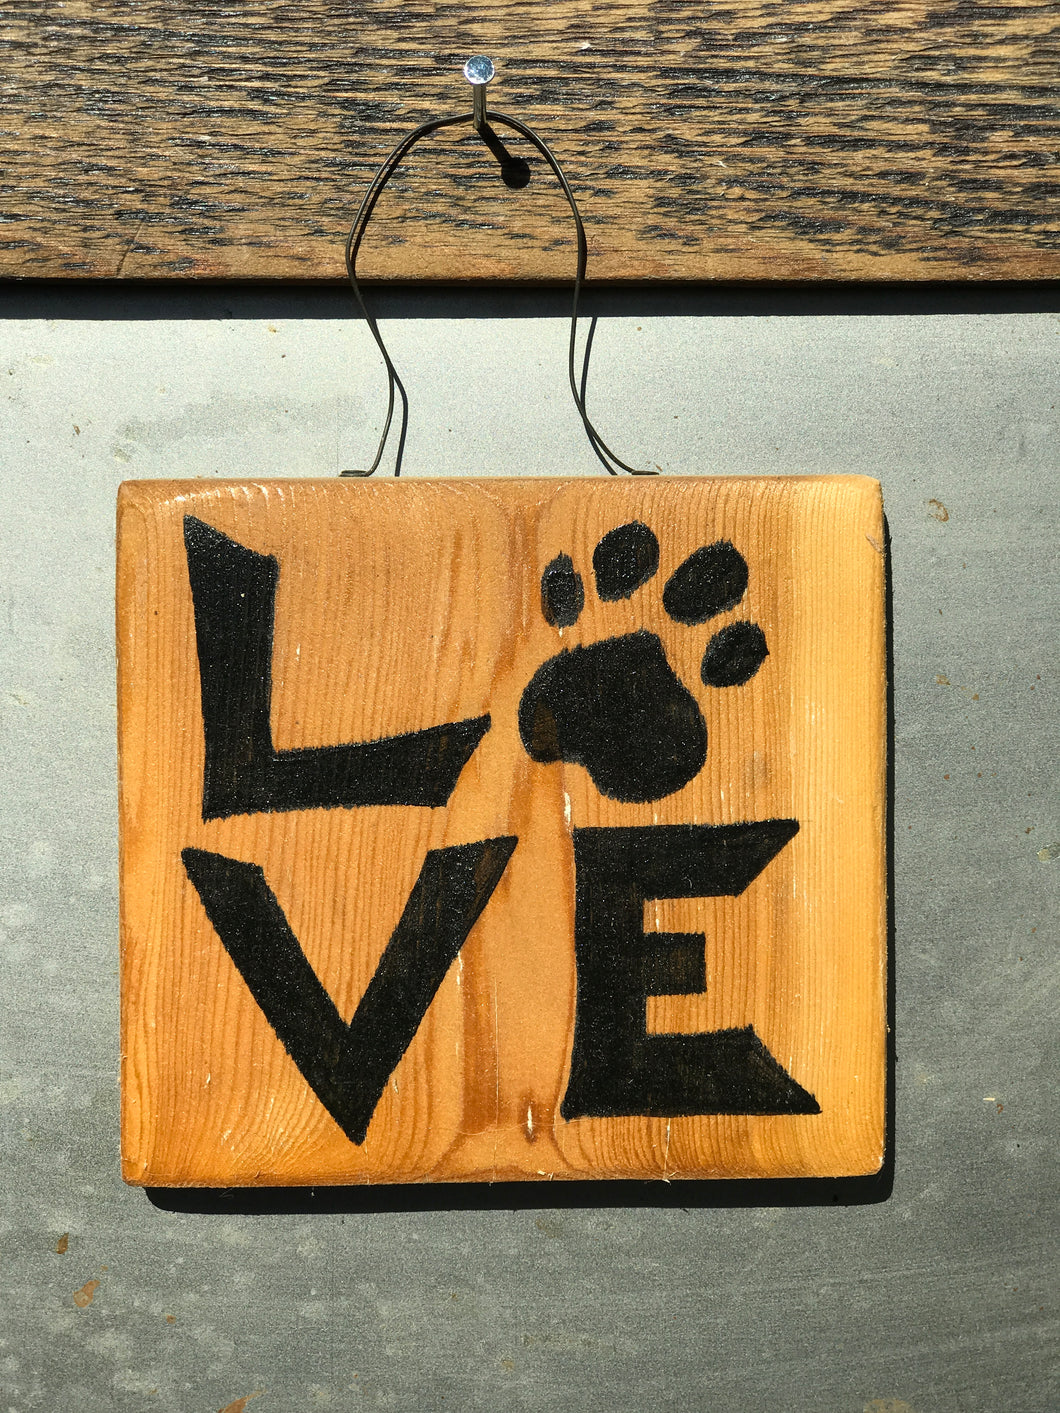 LOVE with paw print / Upcycled Hand-painted Wood Sign